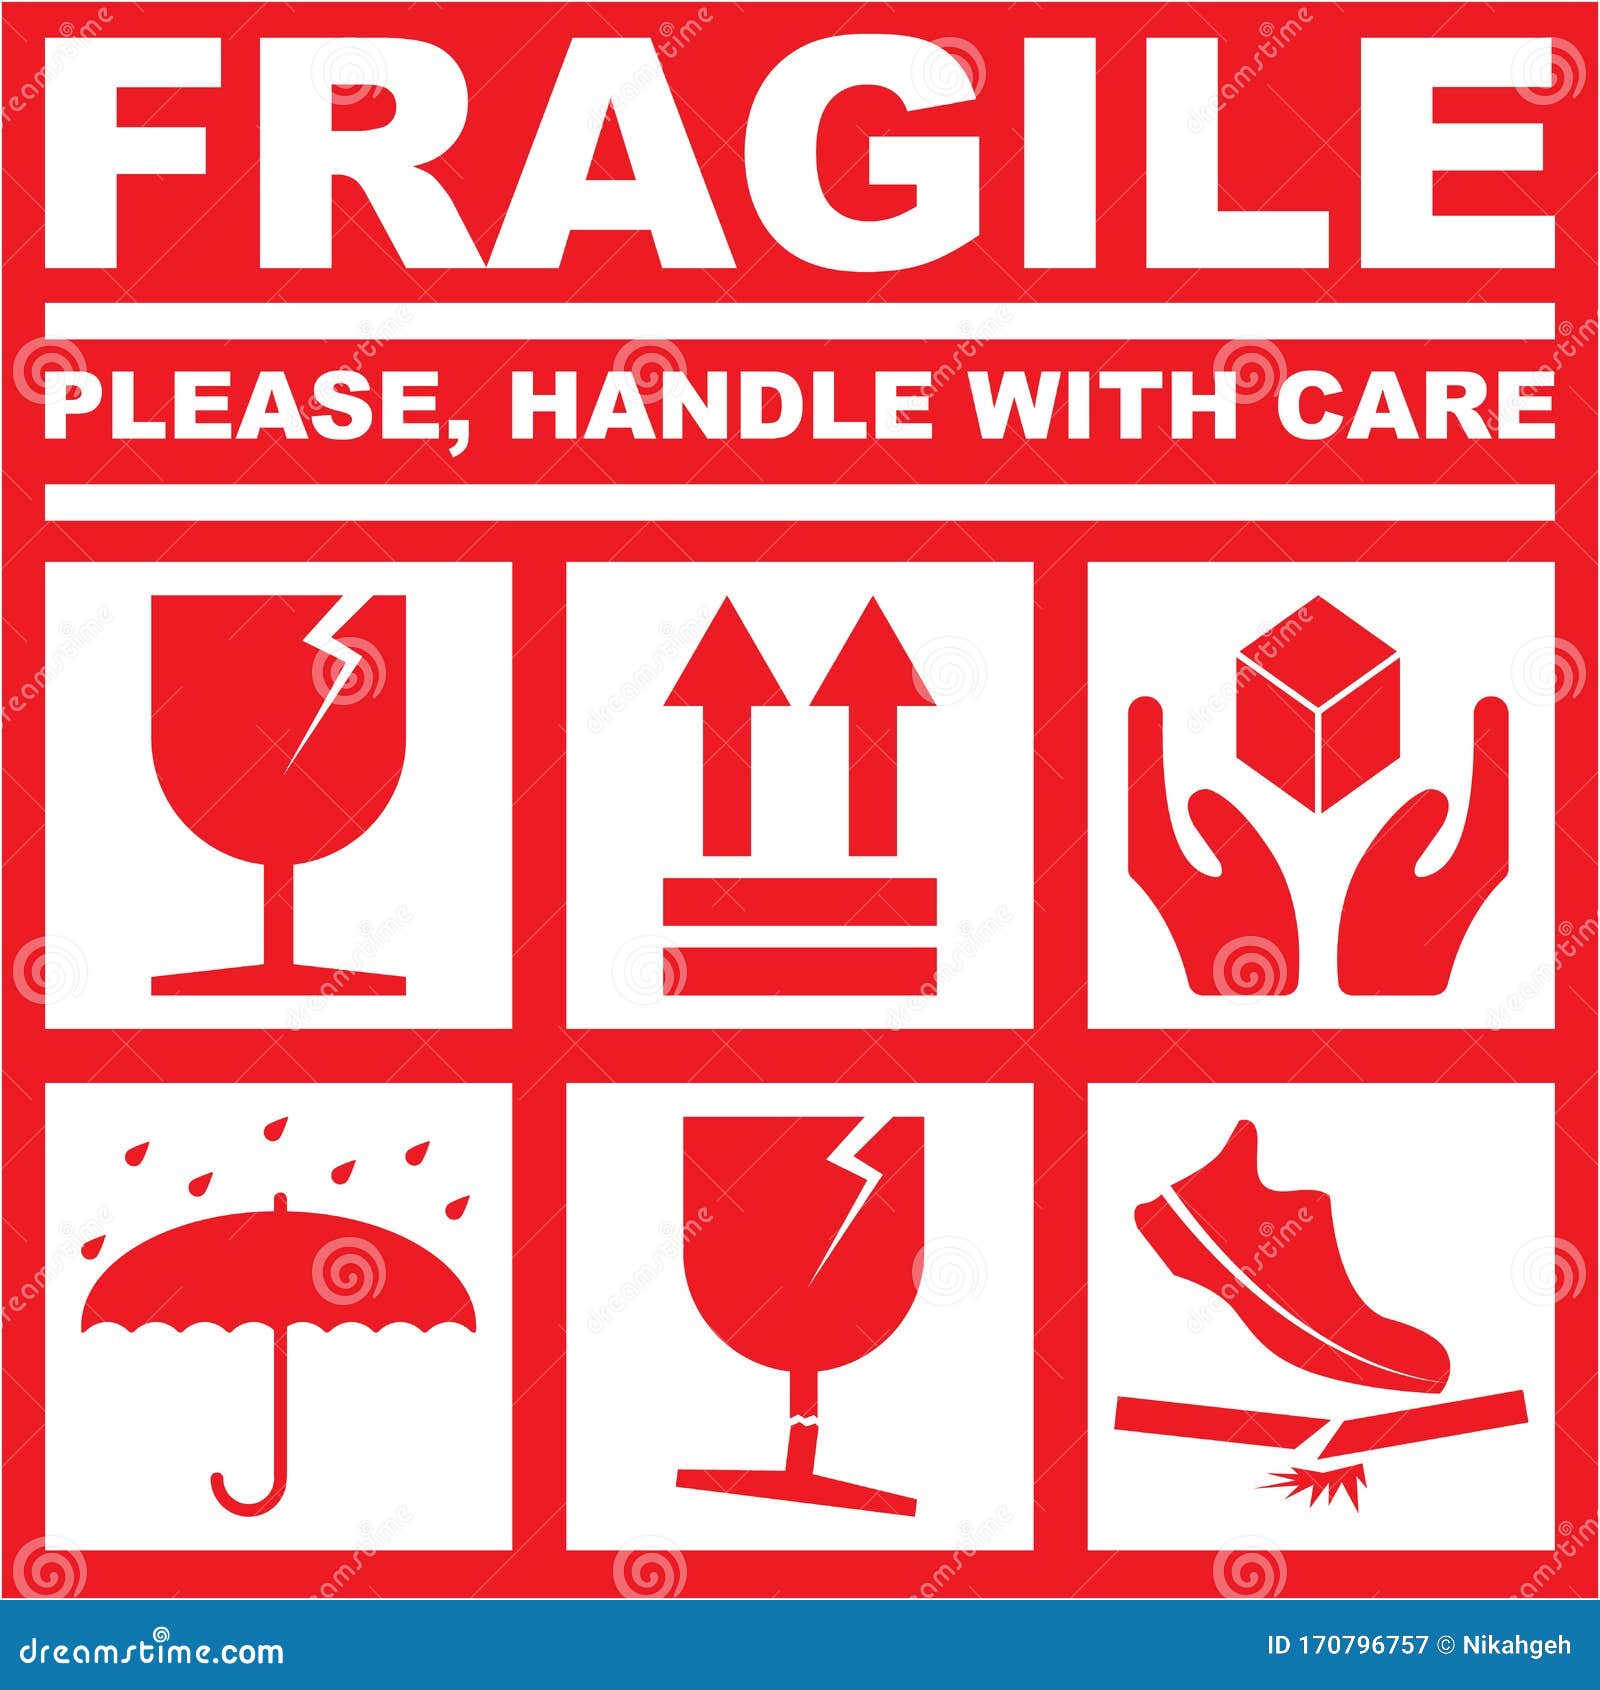 fragile please handle with care - white red color